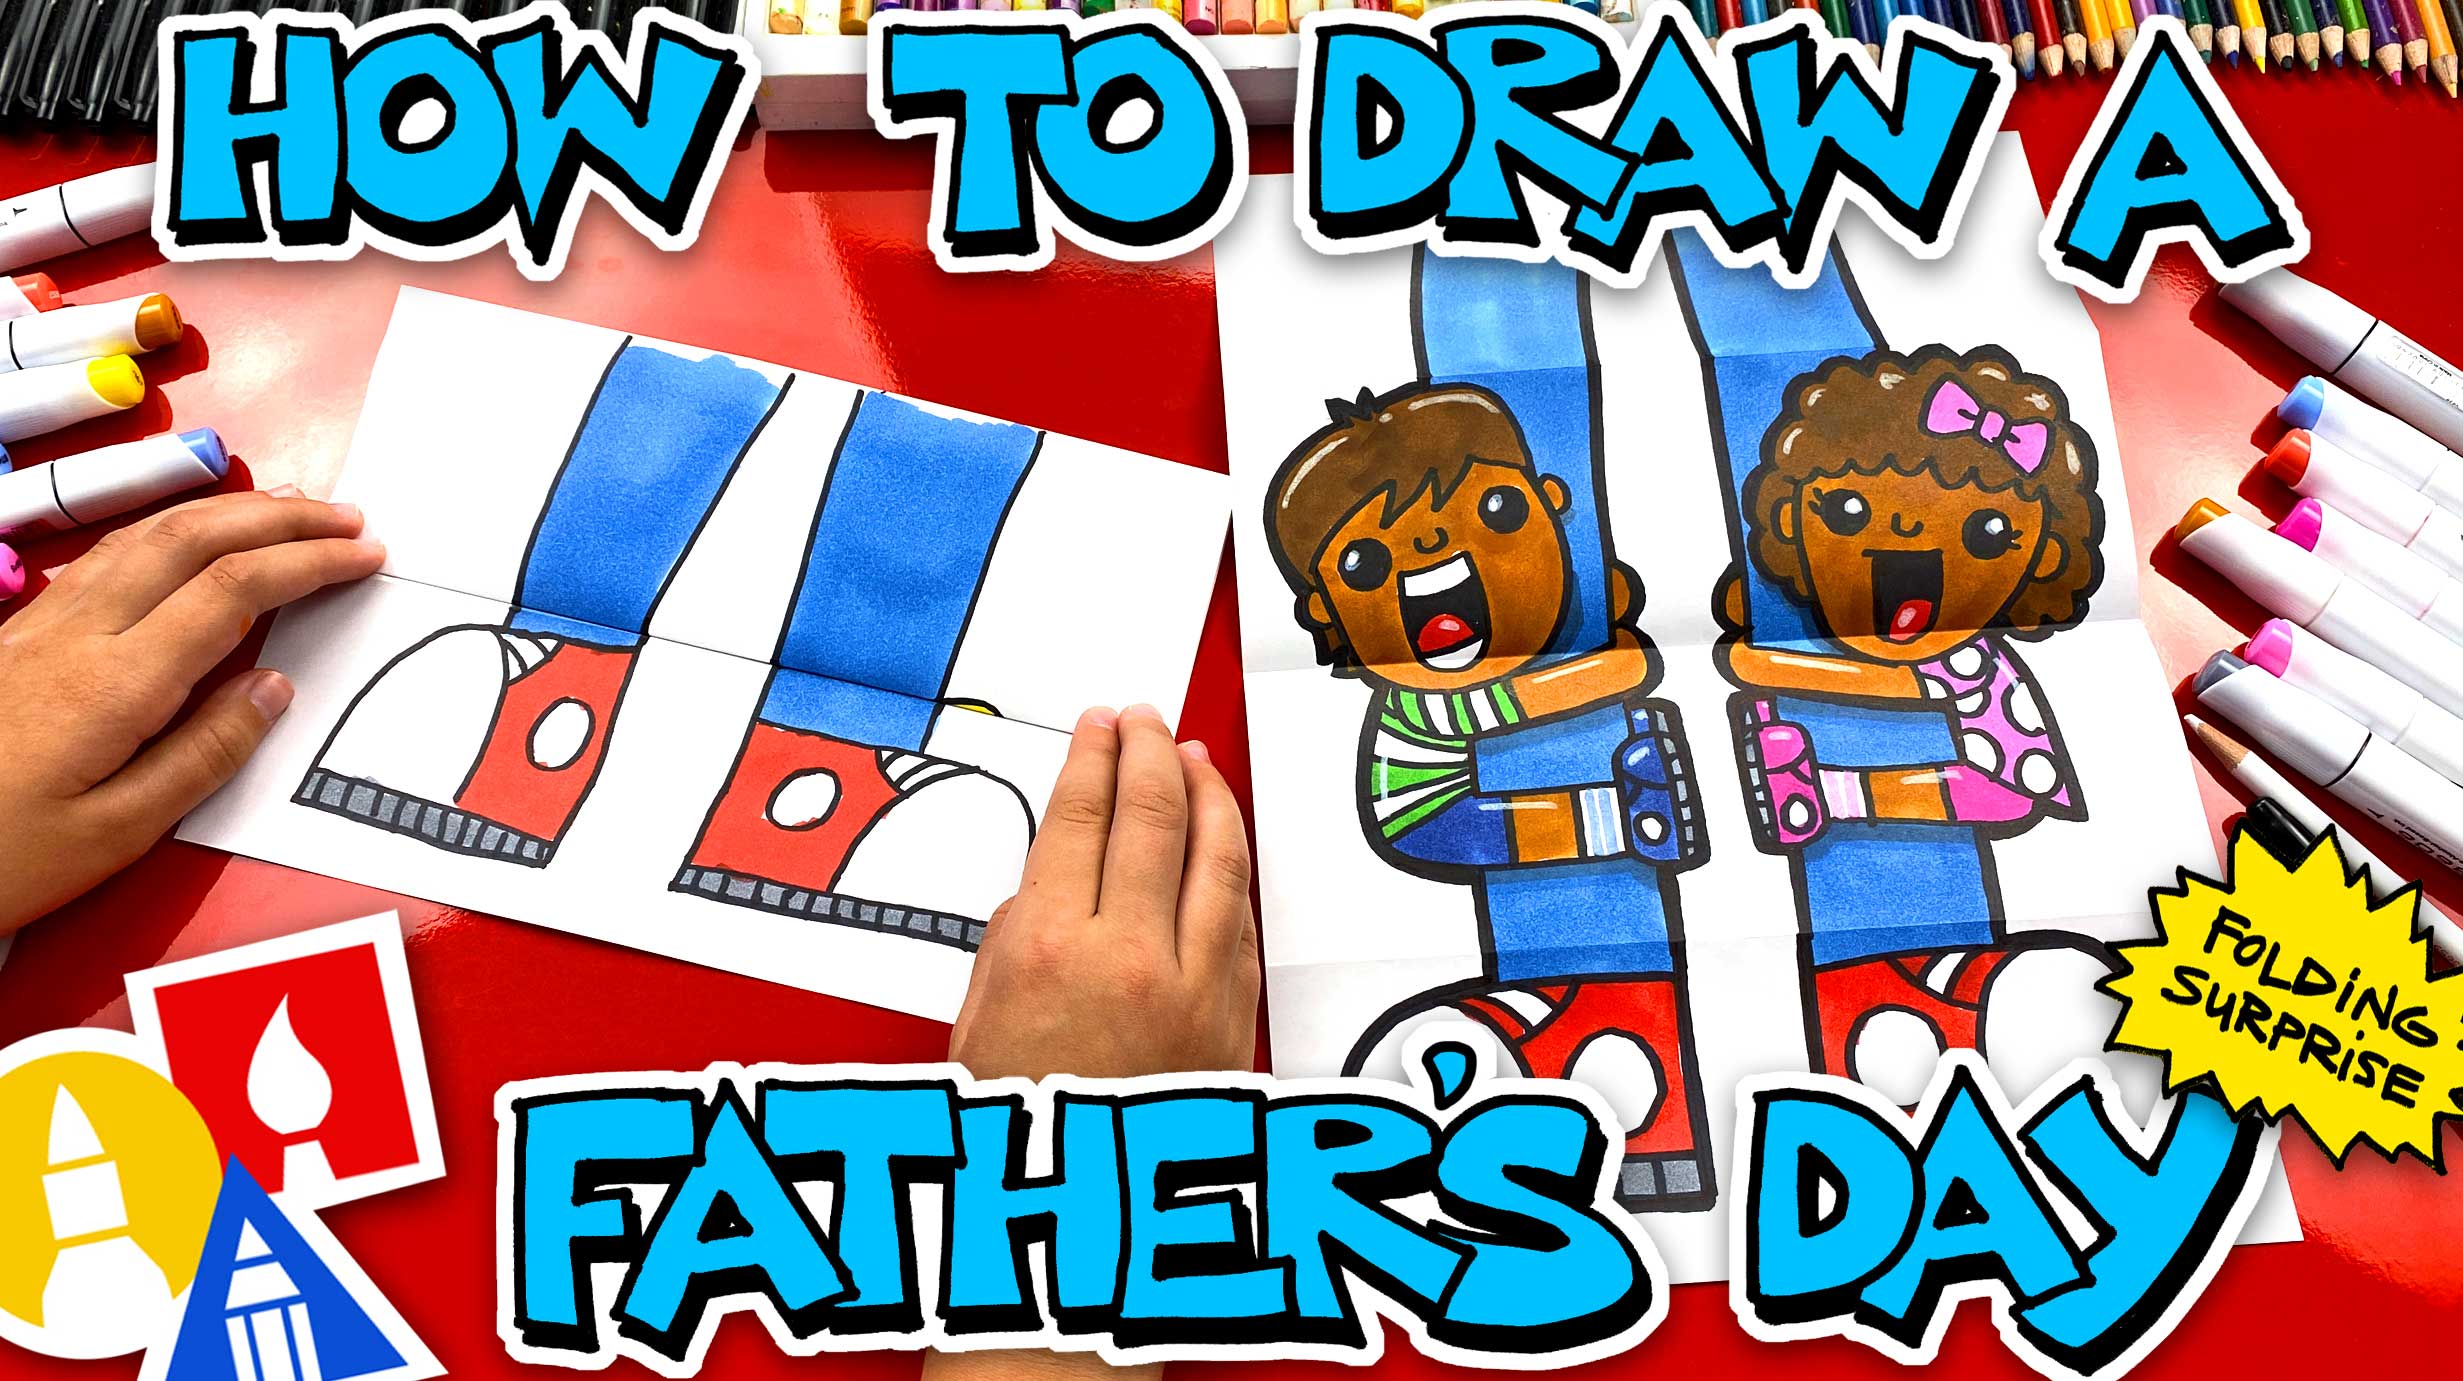 Fun Drawing Activities Tricks for Kids, How To Draw Cute Folding Surprises  🦈🐰🐱, By Activities For Kids